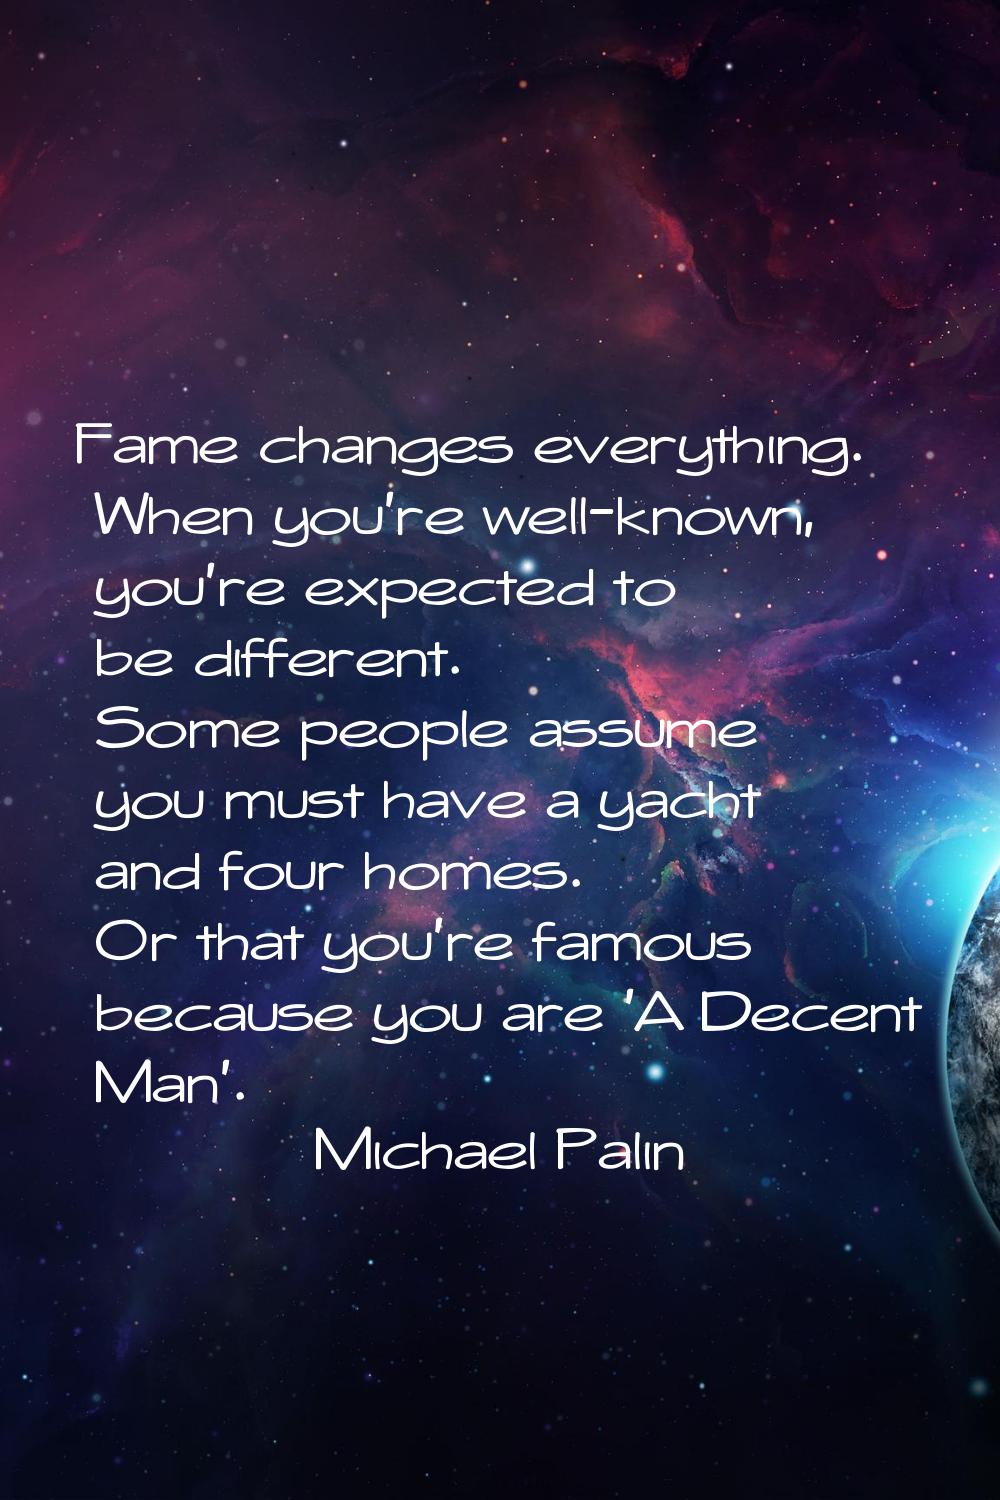 Fame changes everything. When you're well-known, you're expected to be different. Some people assum